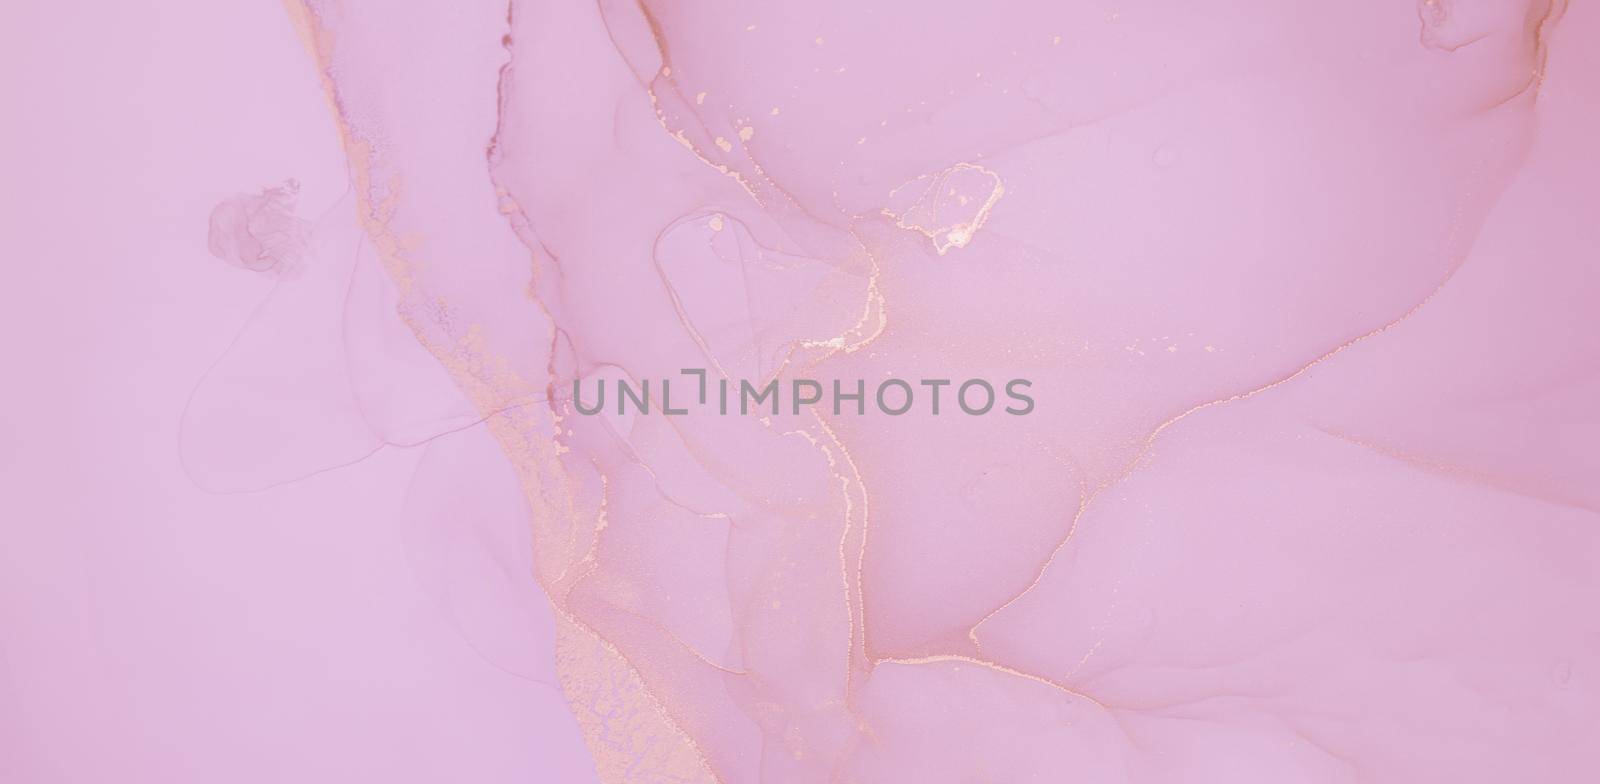 Spring Ink Pastel. Abstract Wallpaper. Oil Wave Print. Marble Wall. Rose Fluid Pattern. Alcohol Ink Wash Pastel. Elegant Mix. Grunge Liquid Design. Watercolor Ink Wash.